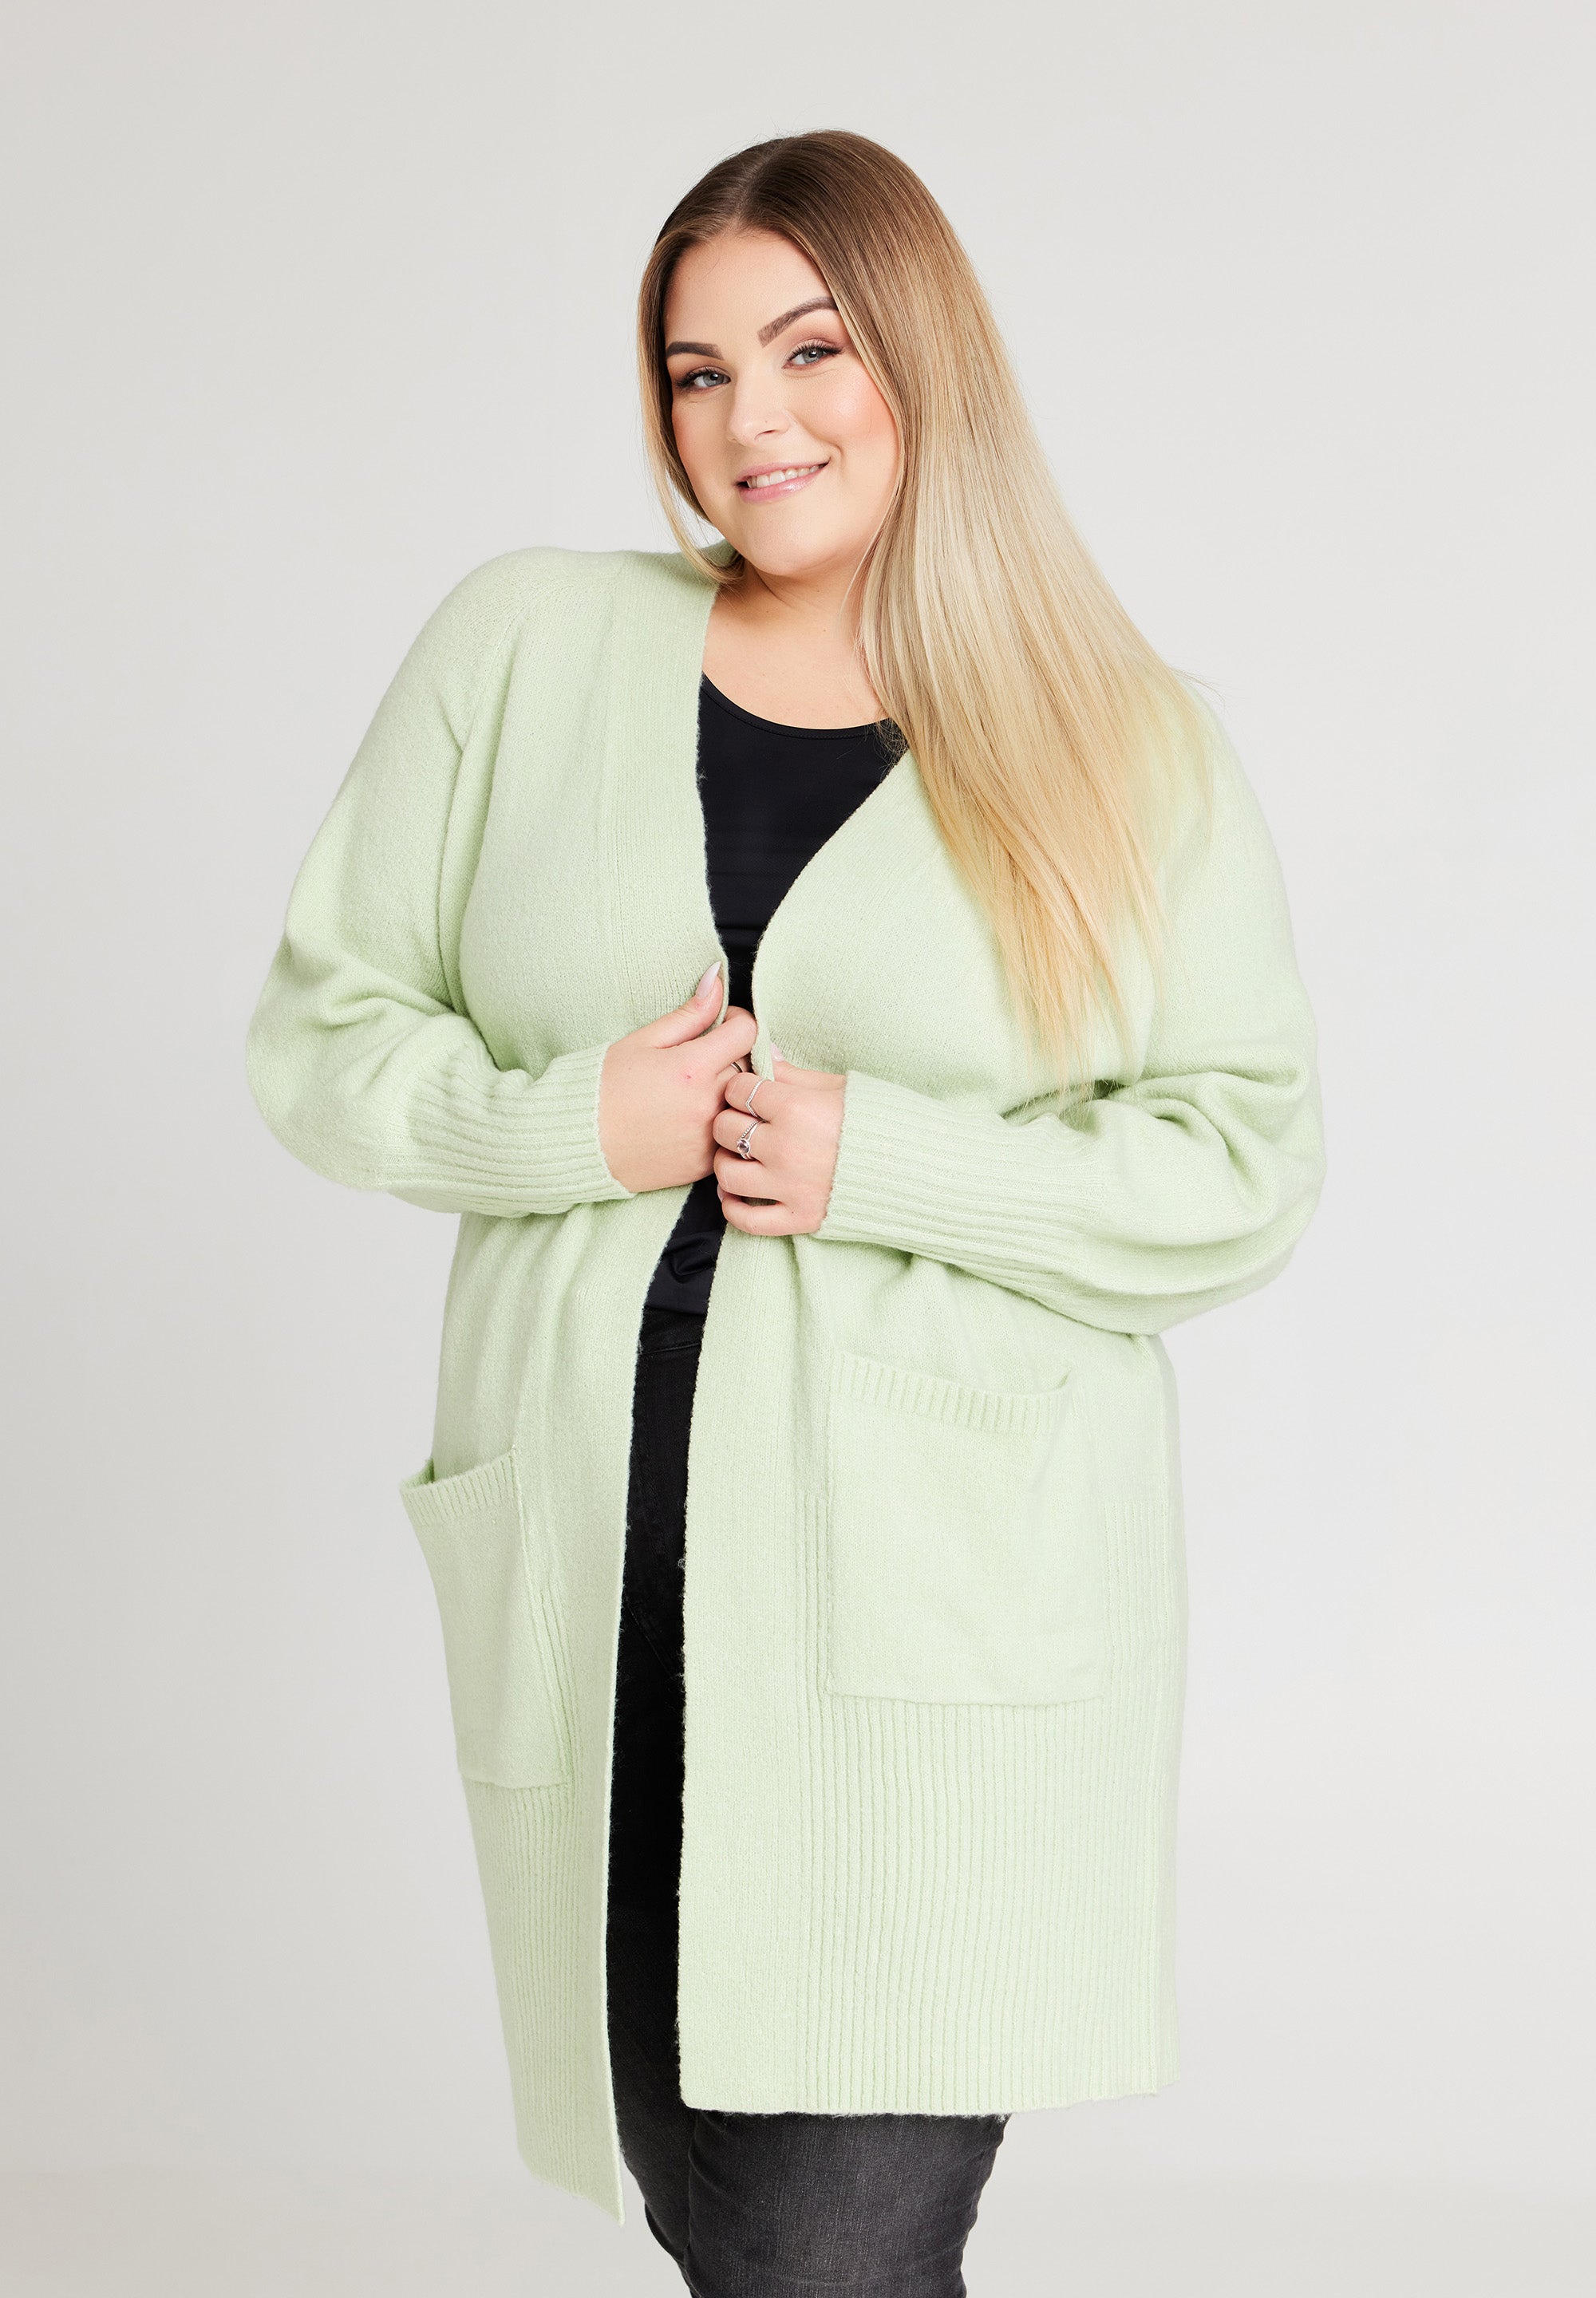 No. 1 By Ox Long Cardigan w. balloon sleeves Mint Green